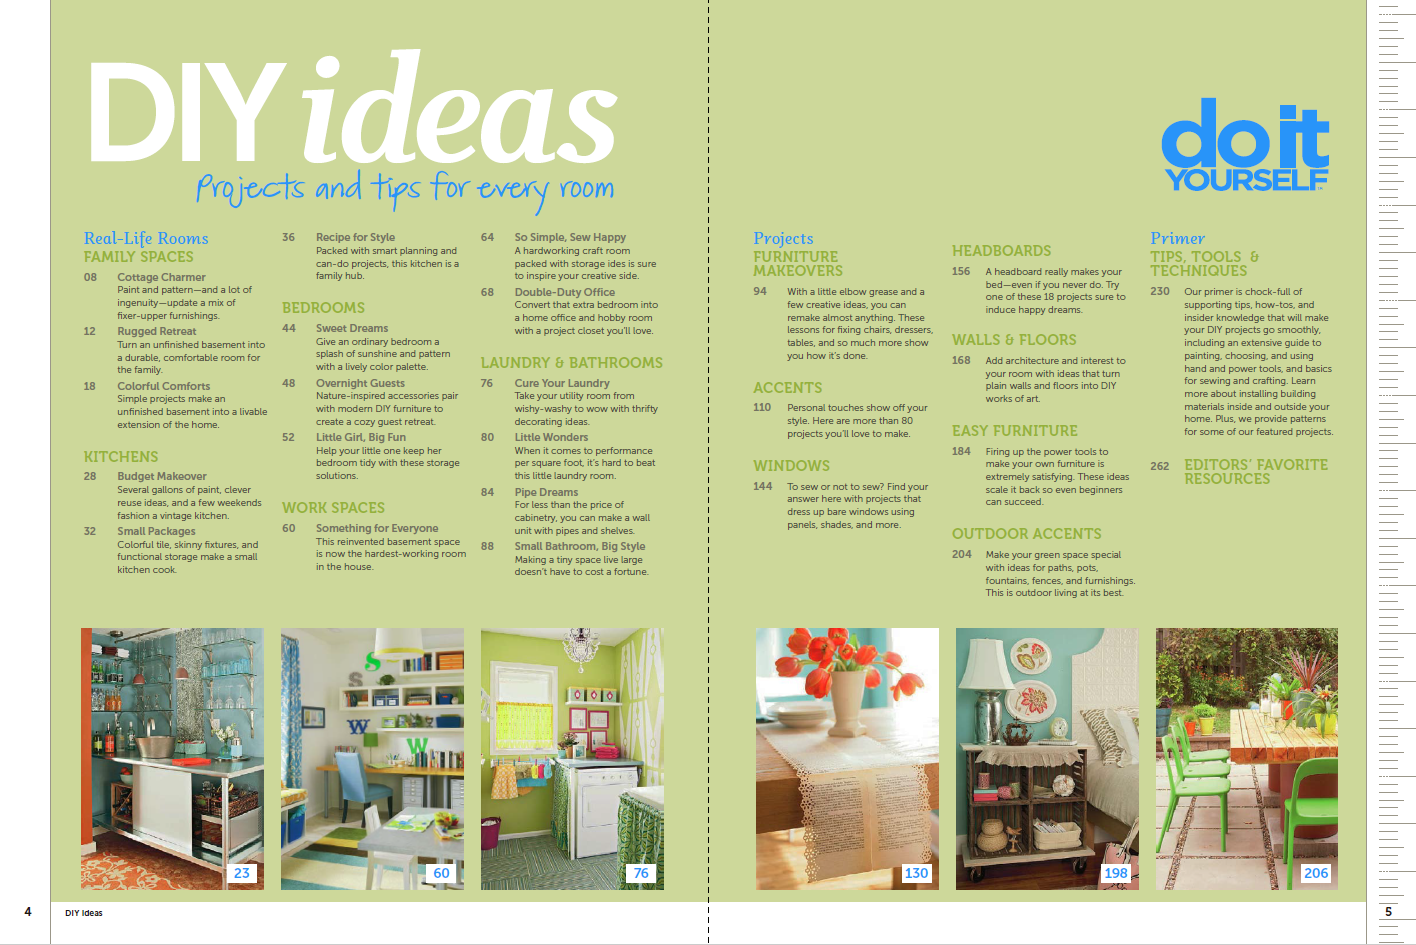 Do It Yourself: DIY Ideas: Projects and tips for every room